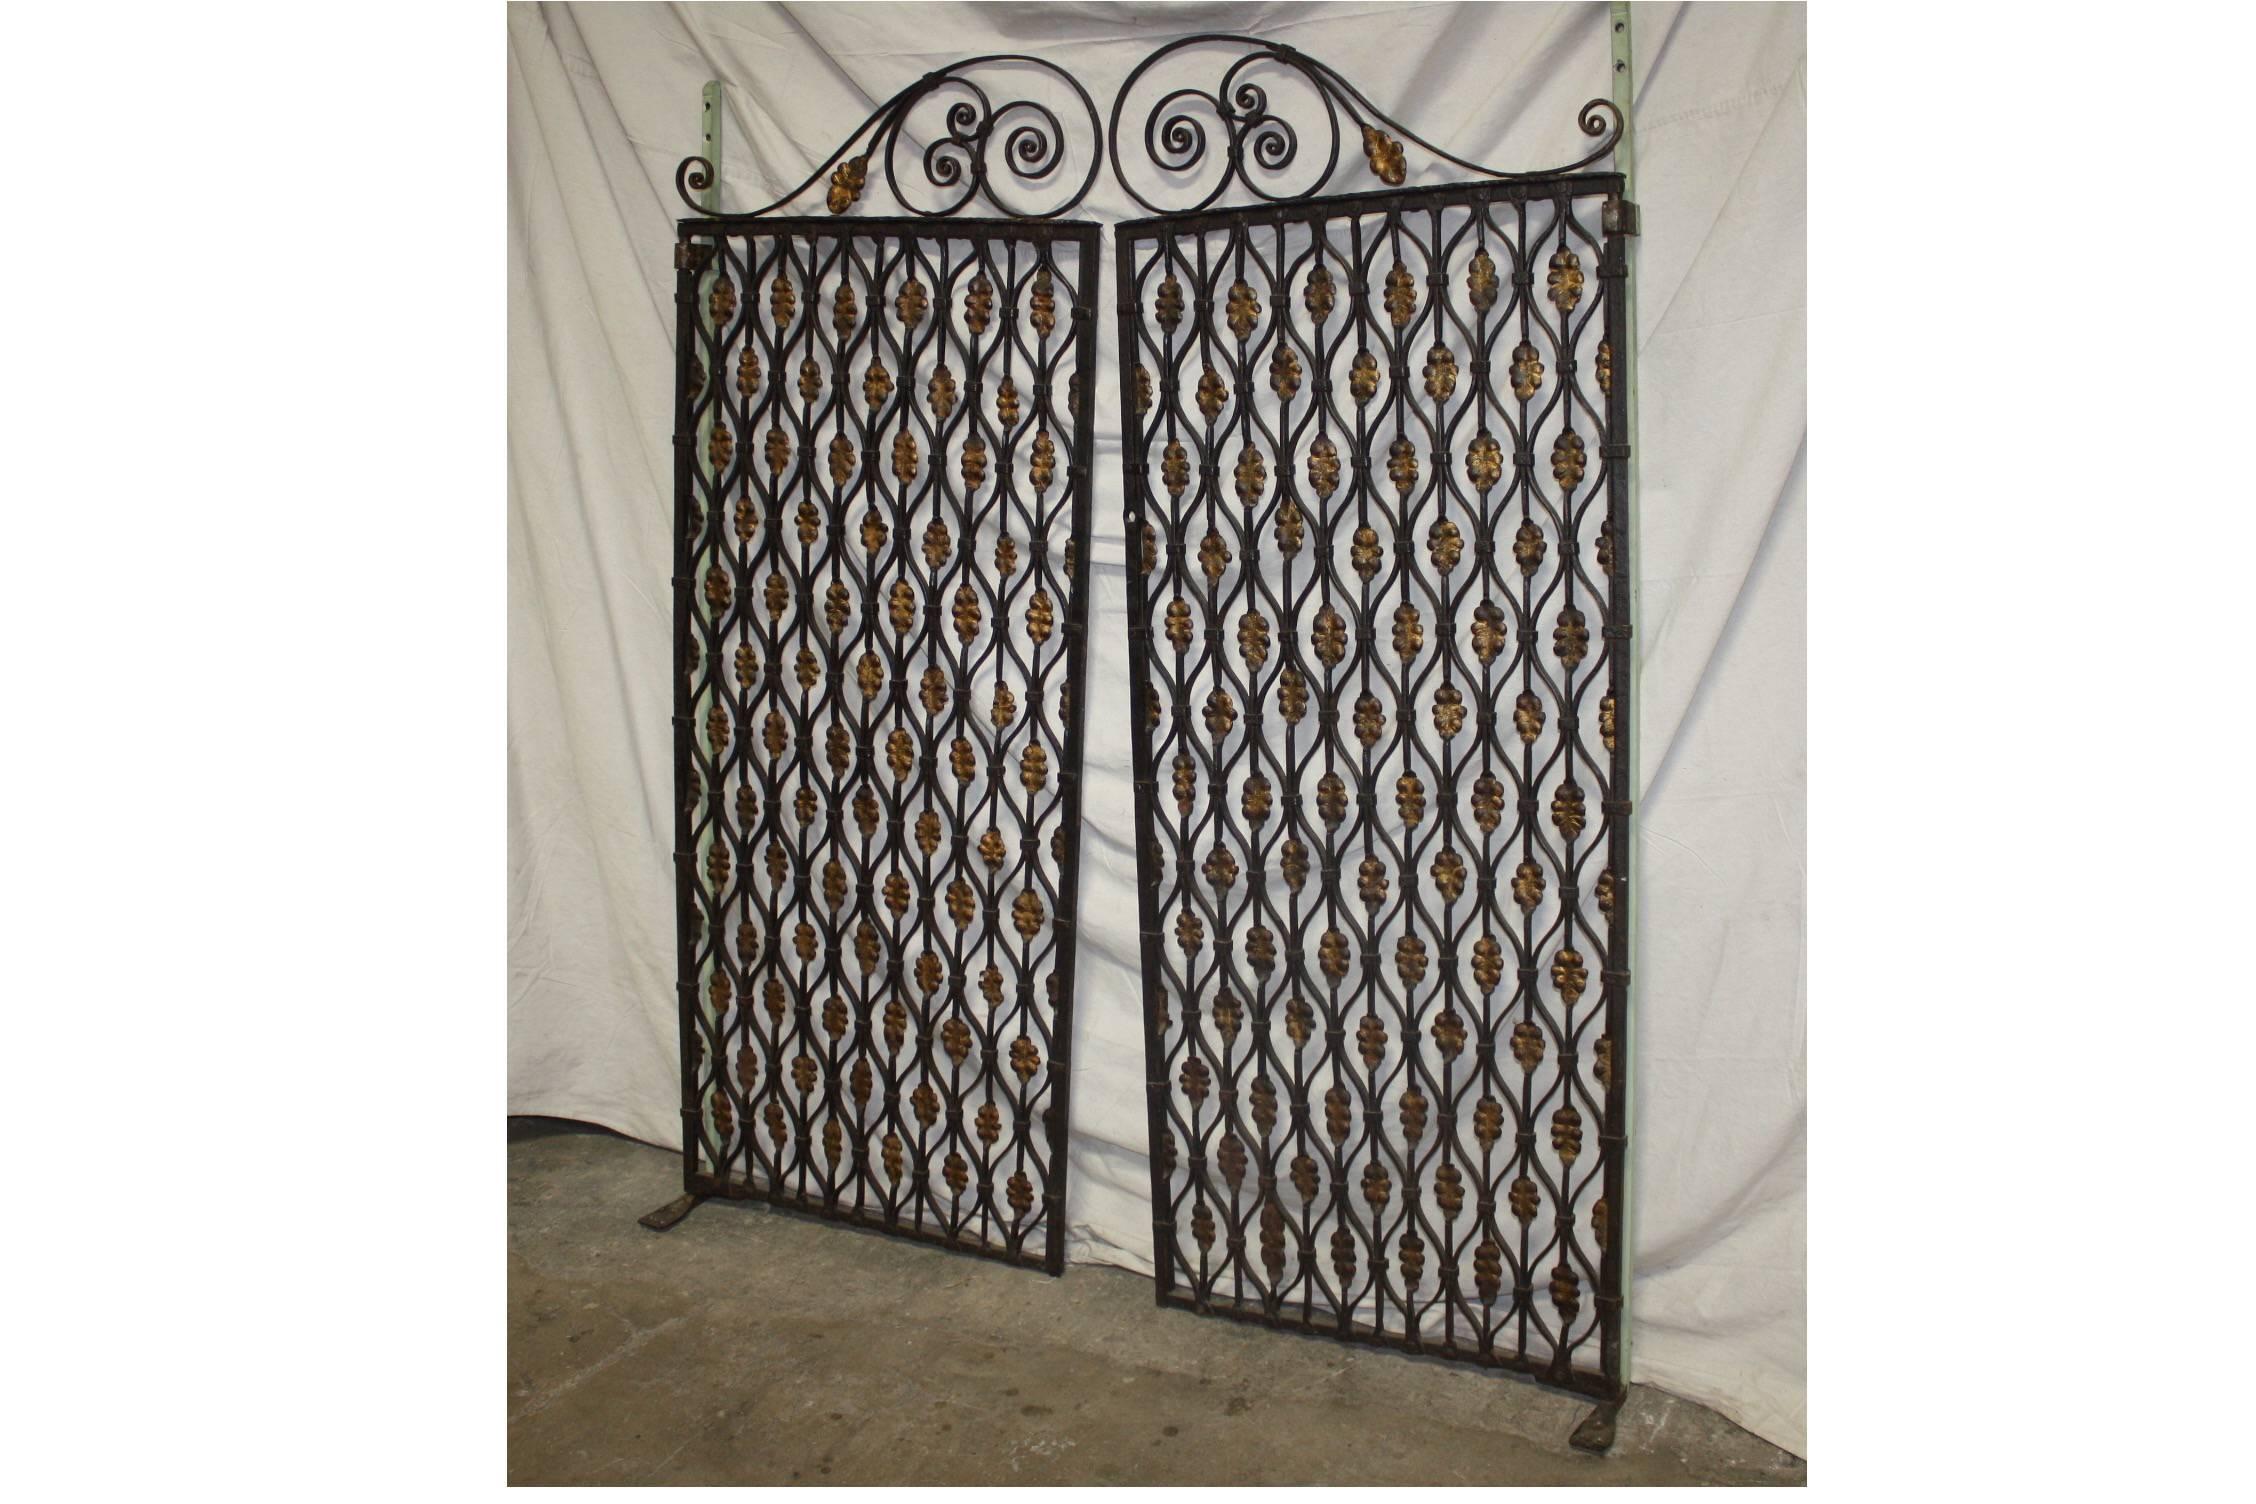 Gorgeous Pair of 18th Century French Iron Gates In Excellent Condition For Sale In Stockbridge, GA